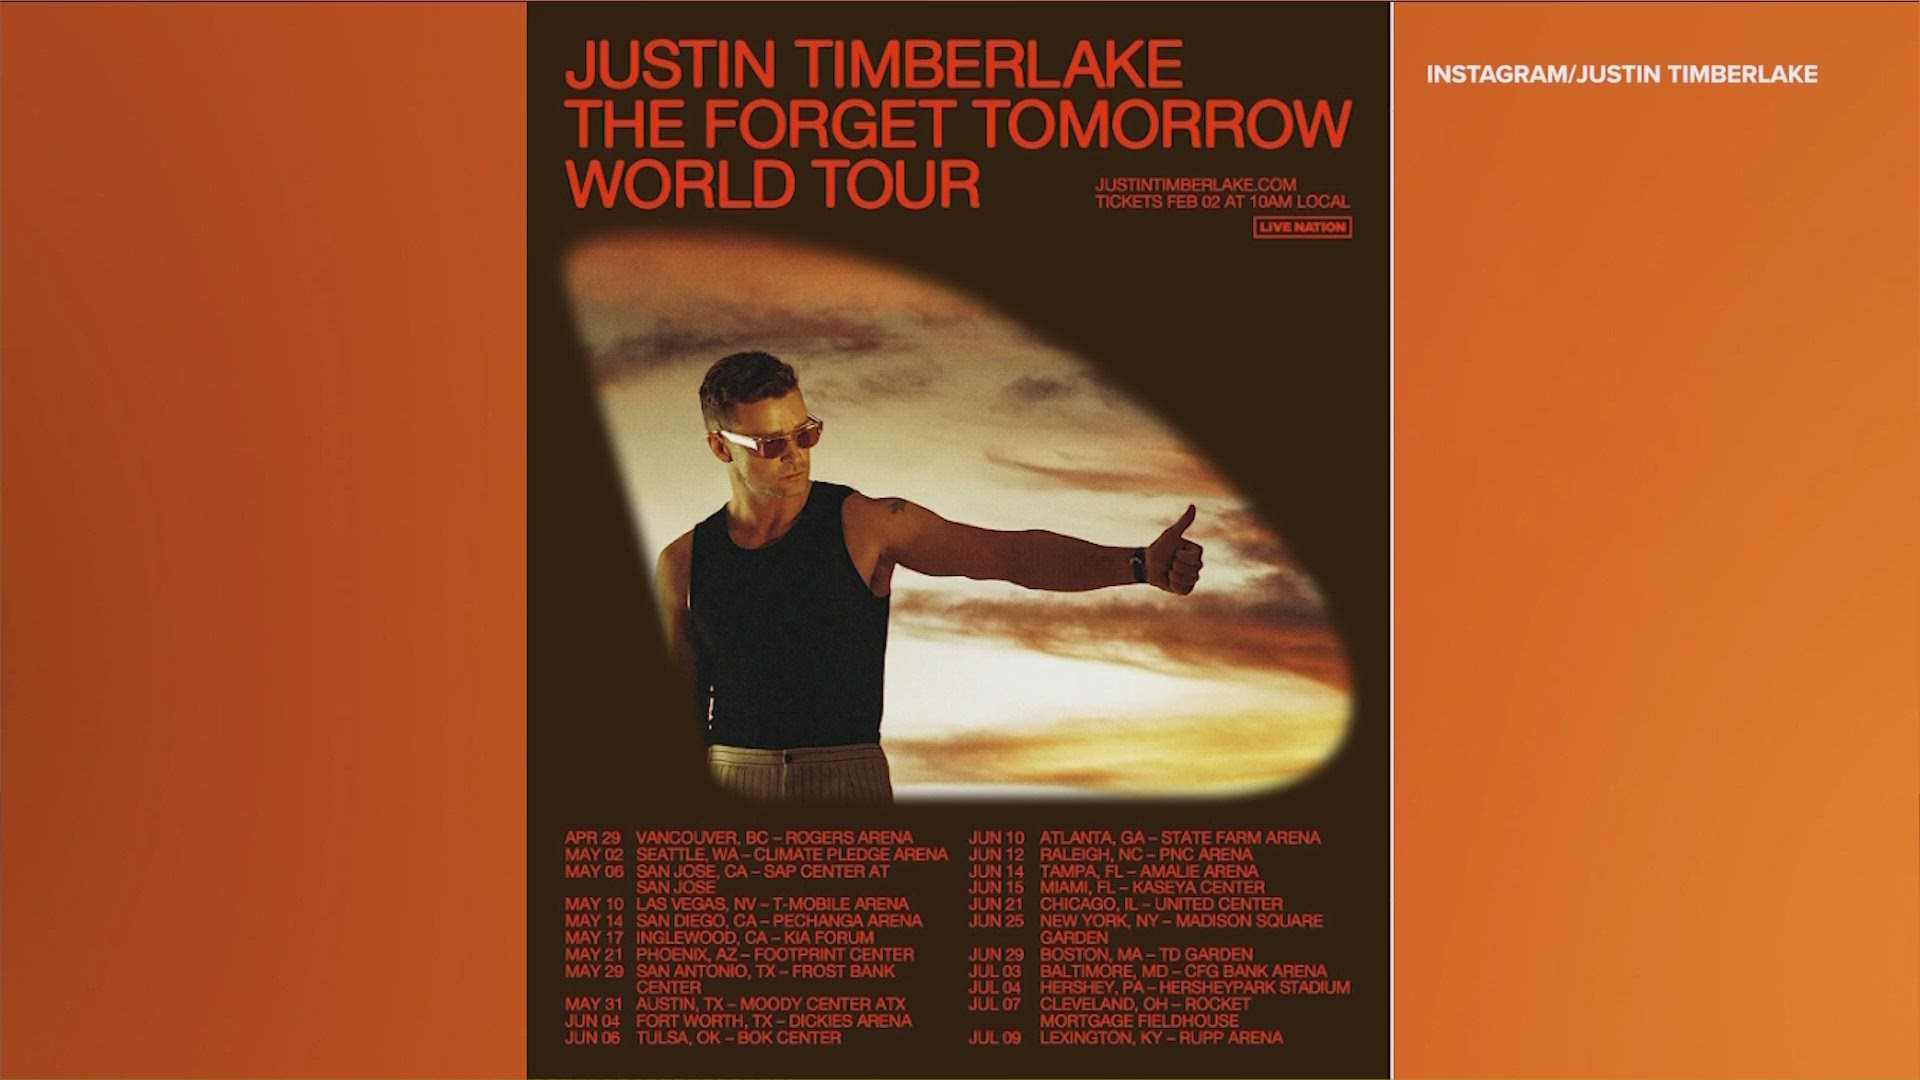 Justin Timberlake's "Forget Tomorrow World Tour" will stop at Moody Center on May 31.